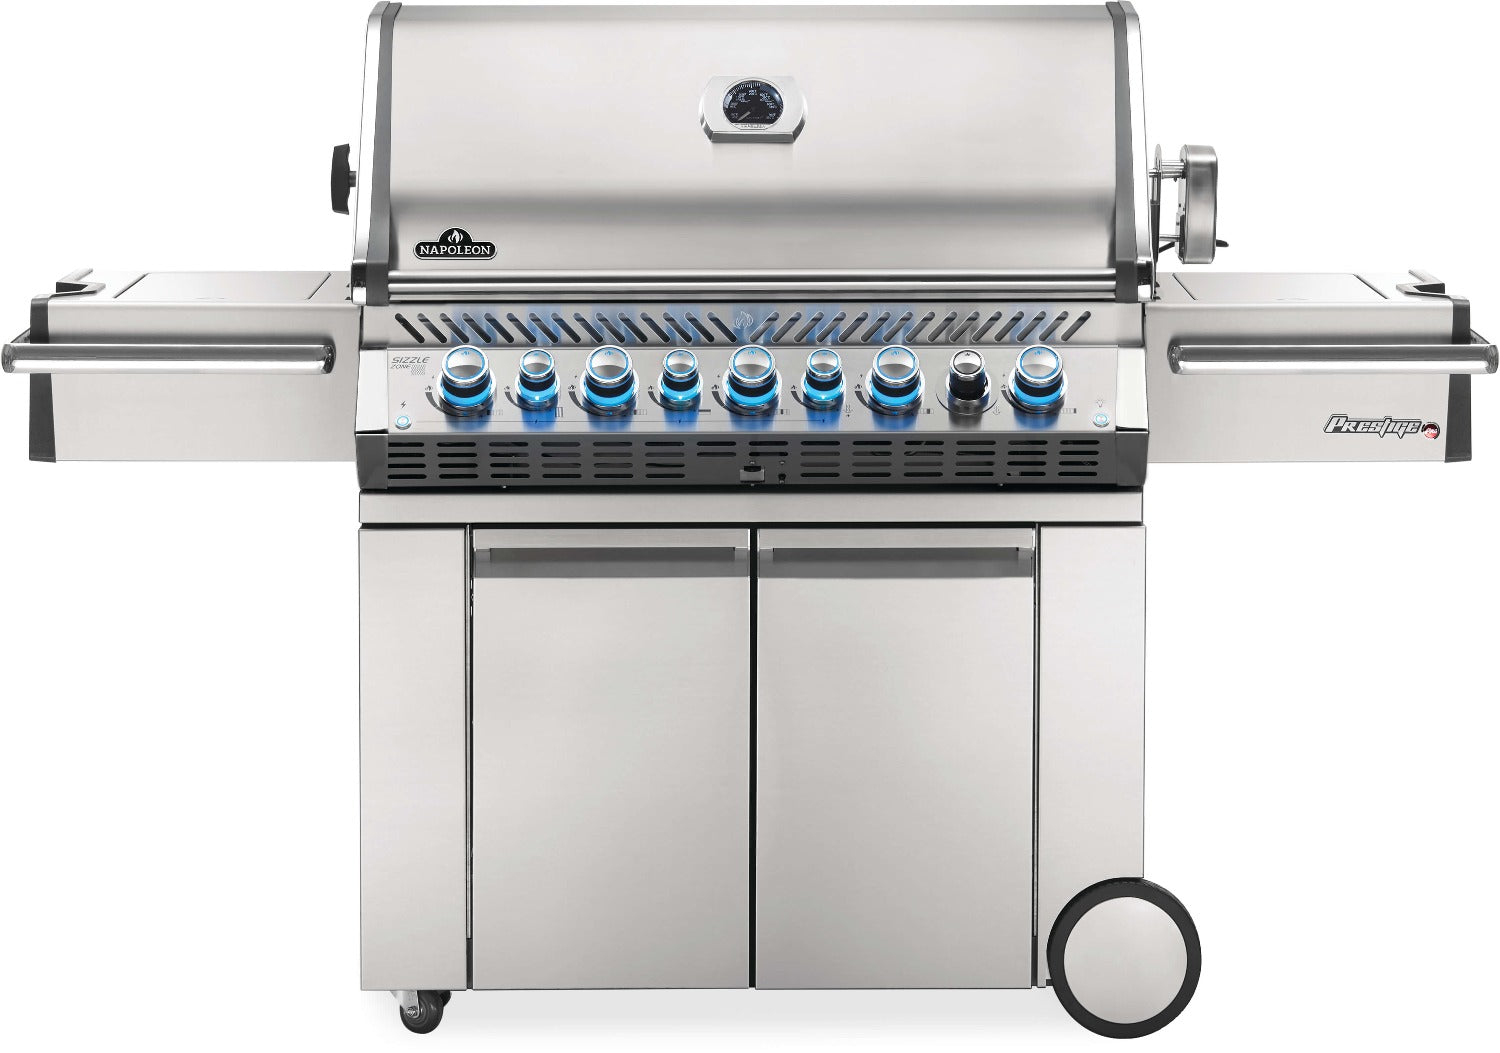 Napoleon Grills Prestige PRO 665 Gas Grill with Infrared Side and Rear Burners, Stainless Steel Outdoor Grills Liquid Propane 12029740